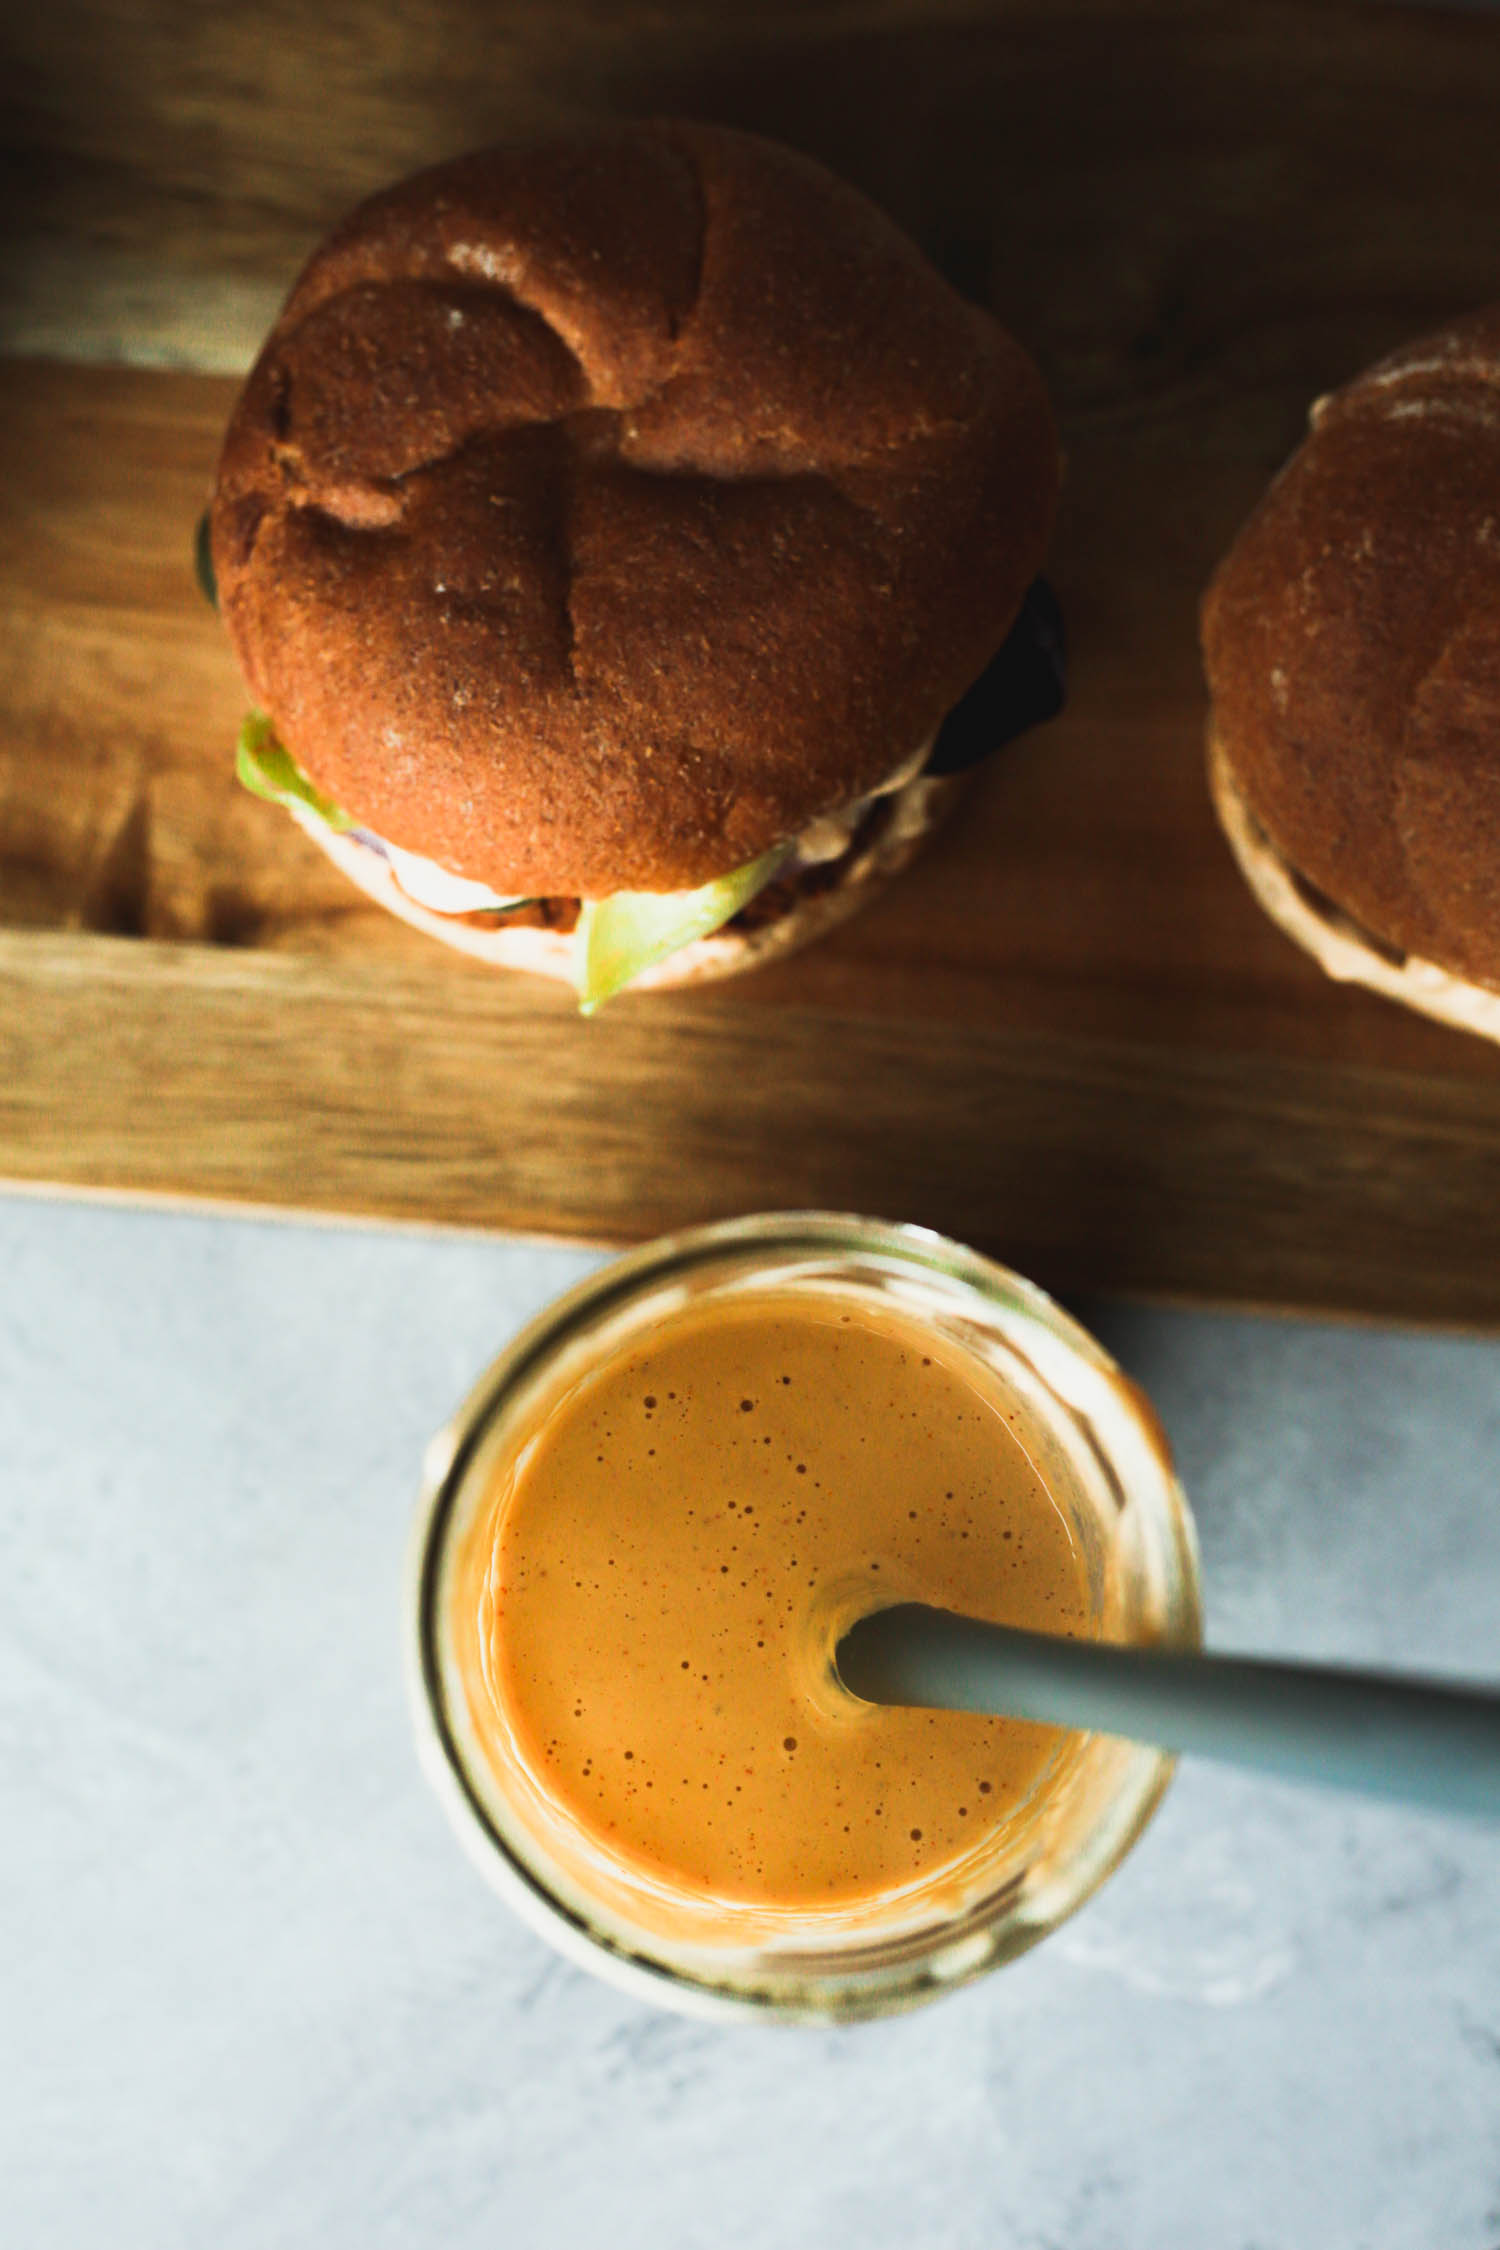 smoky Tangy Cream ready for burgers | Recipe by Sophia DeSantis, Photo by Kari of Beautiful Ingredient.